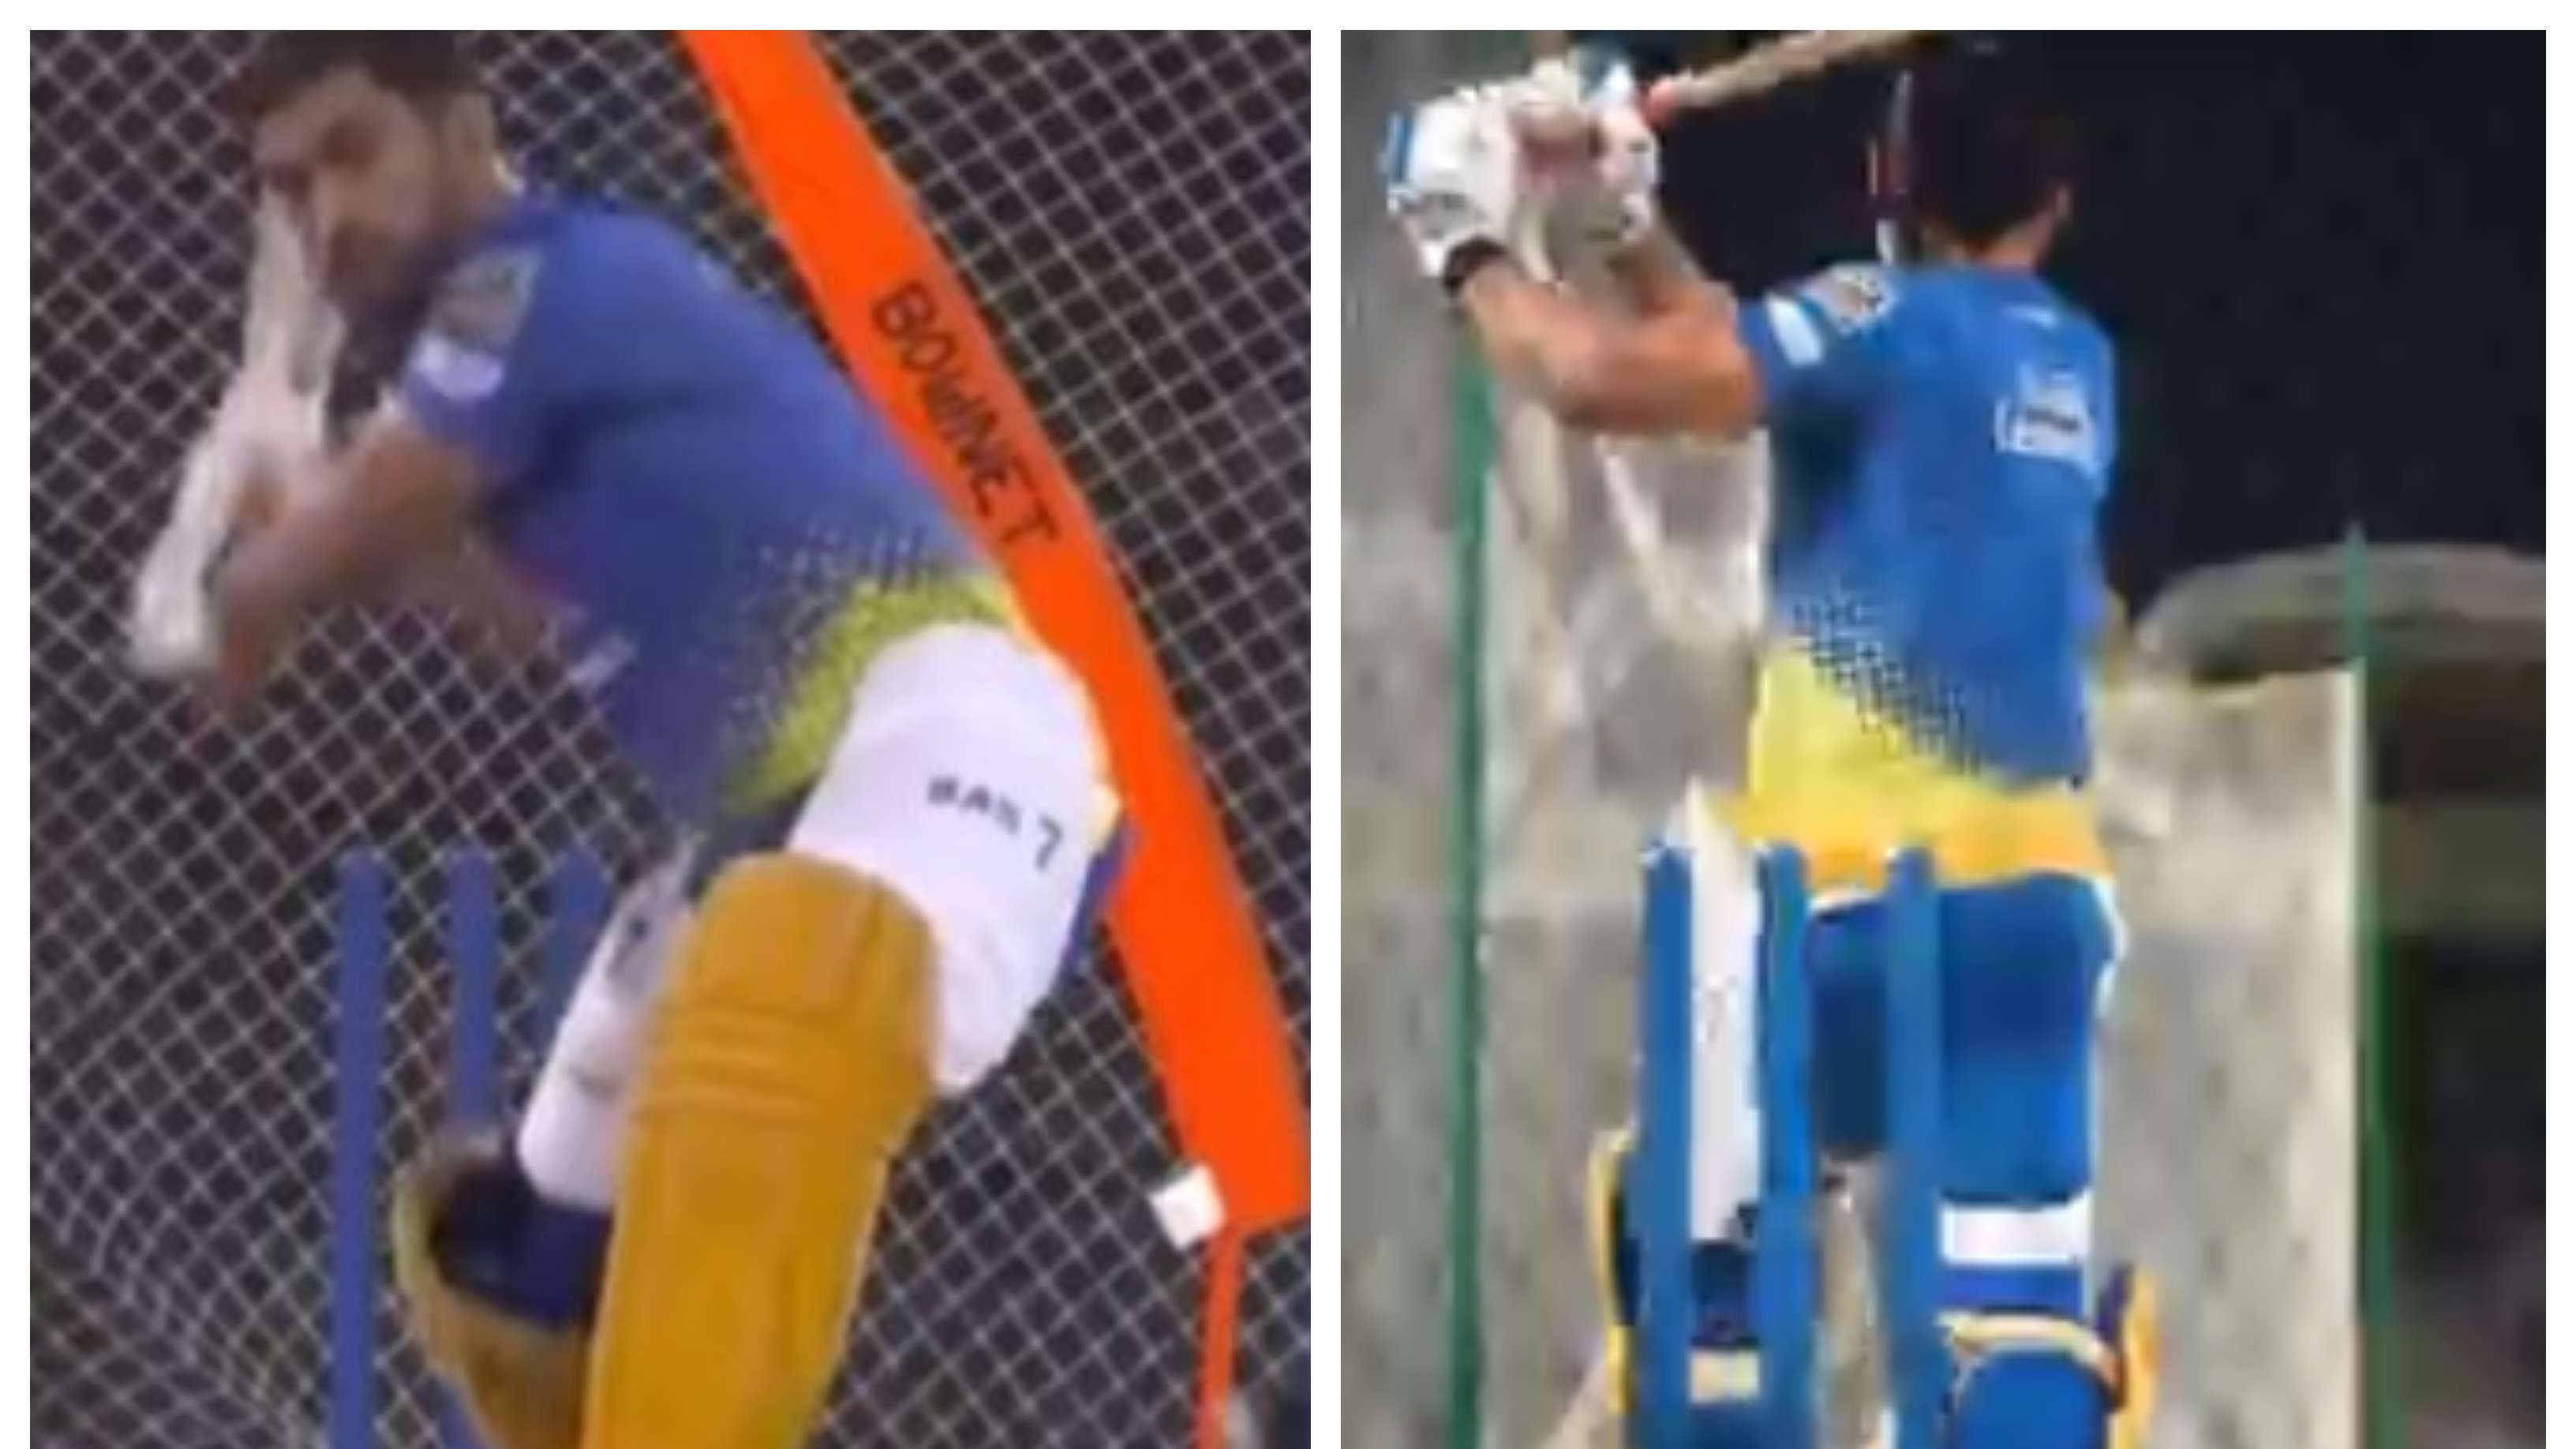 IPL 2021: WATCH – MS Dhoni hitting sixes at will during CSK’s training camp ahead of upcoming IPL